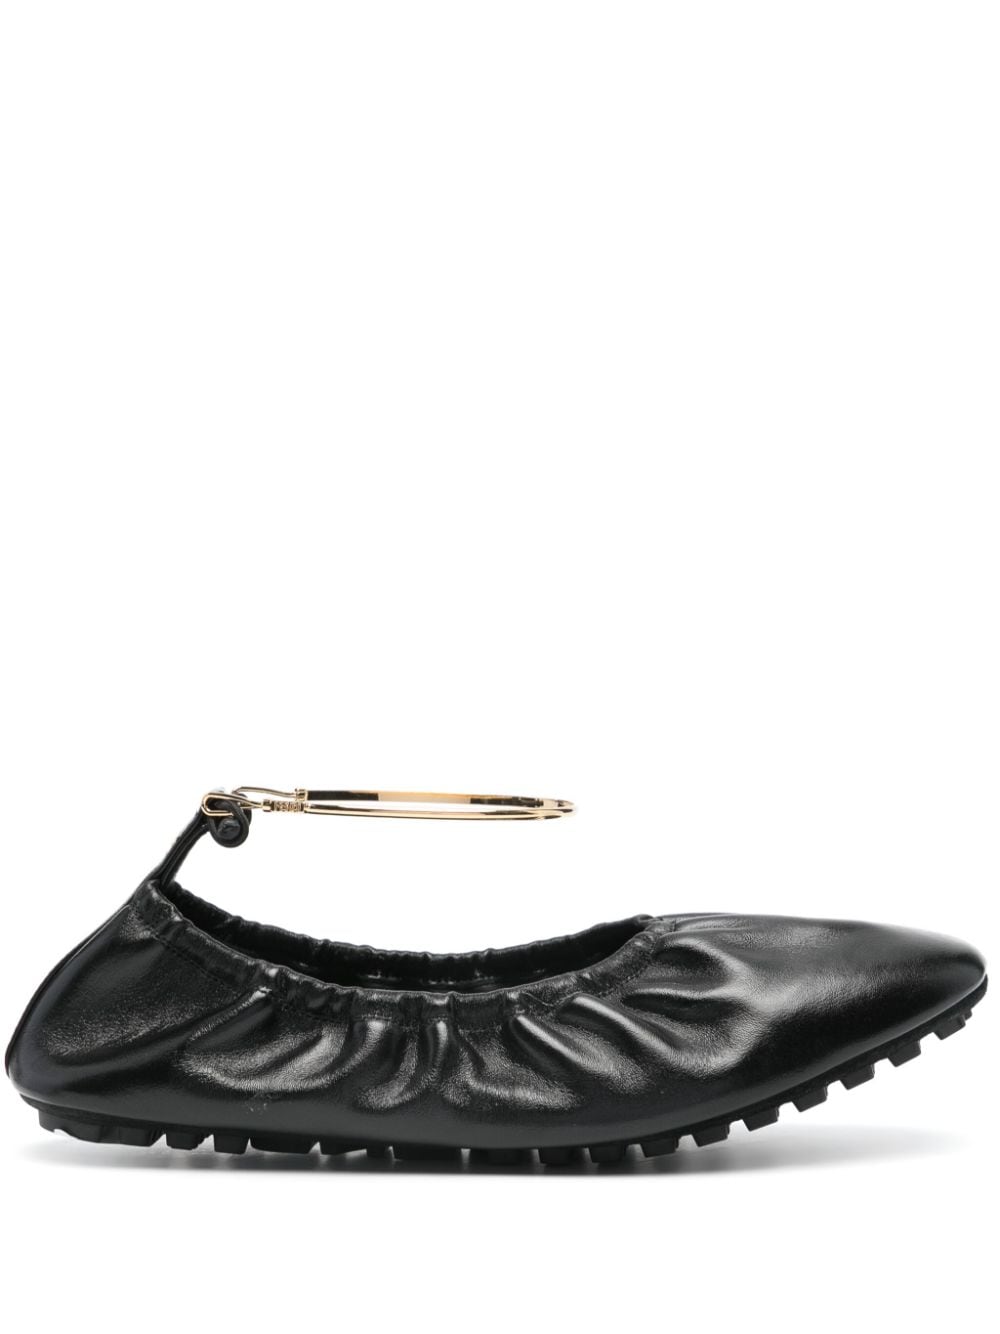 FENDI Black Leather Ballet Flats with Ruched Detail and FF Motif Anklet for Women